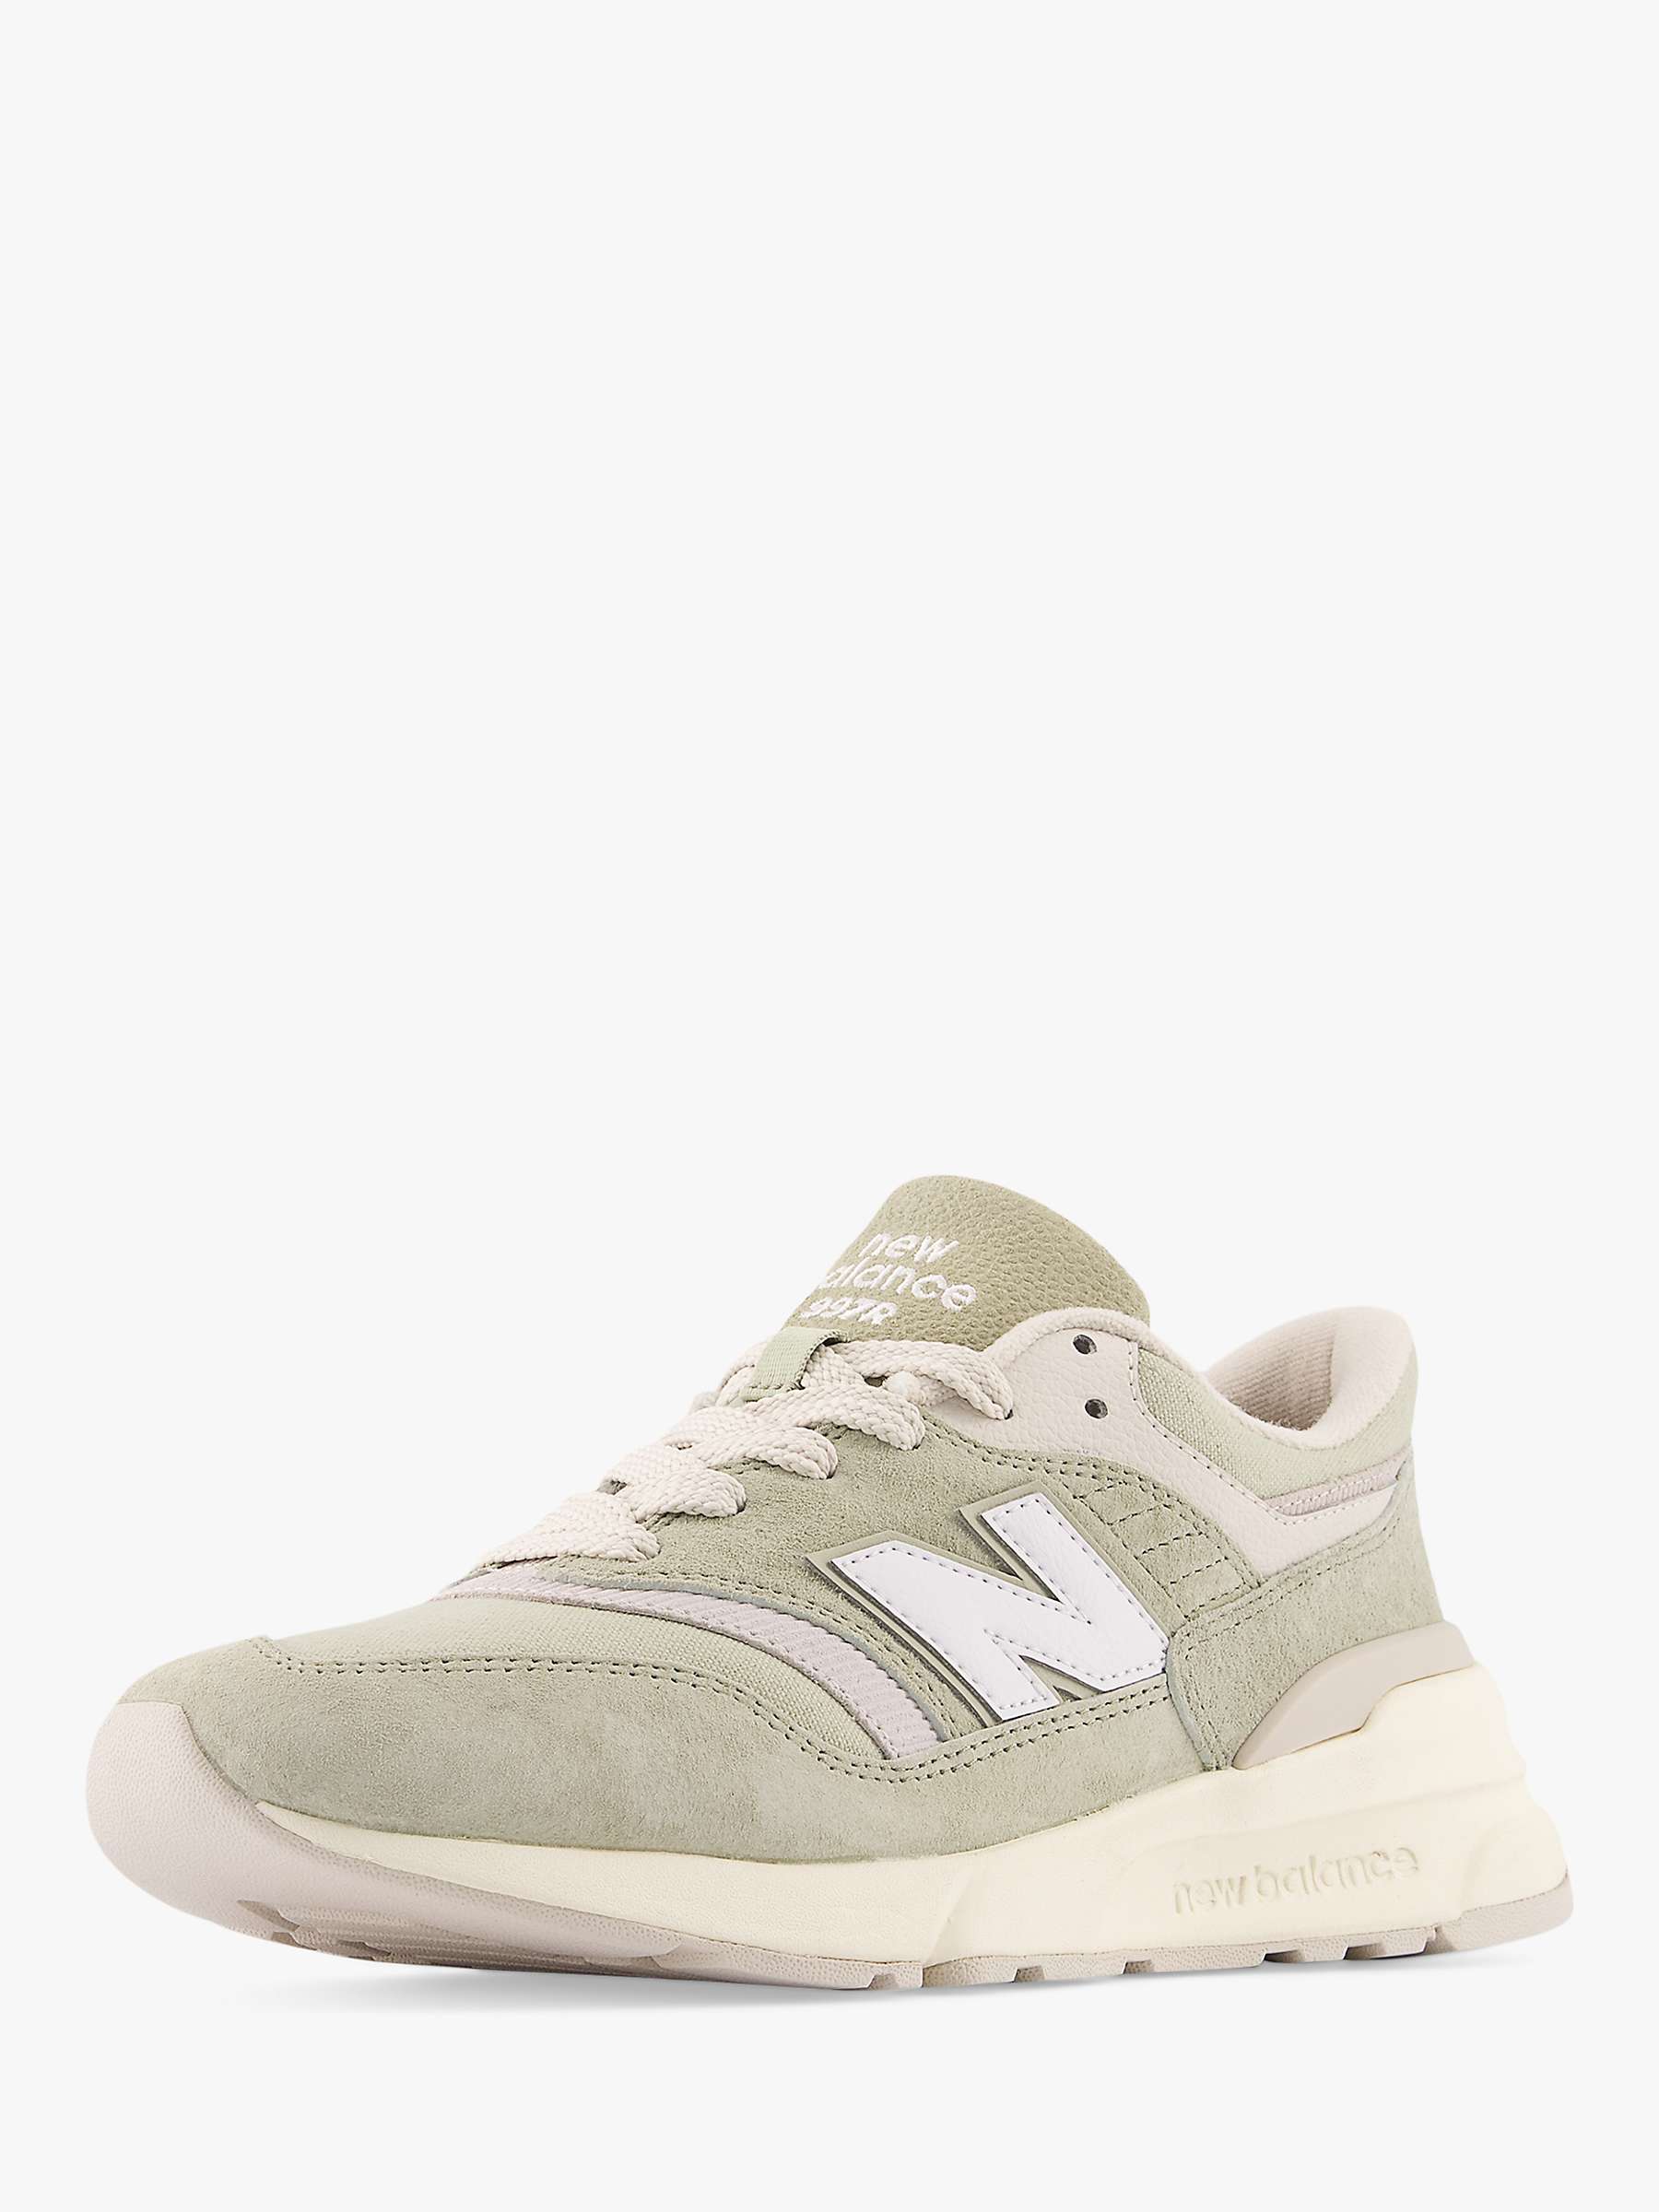 Buy New Balance 997R Suede Trainers Online at johnlewis.com